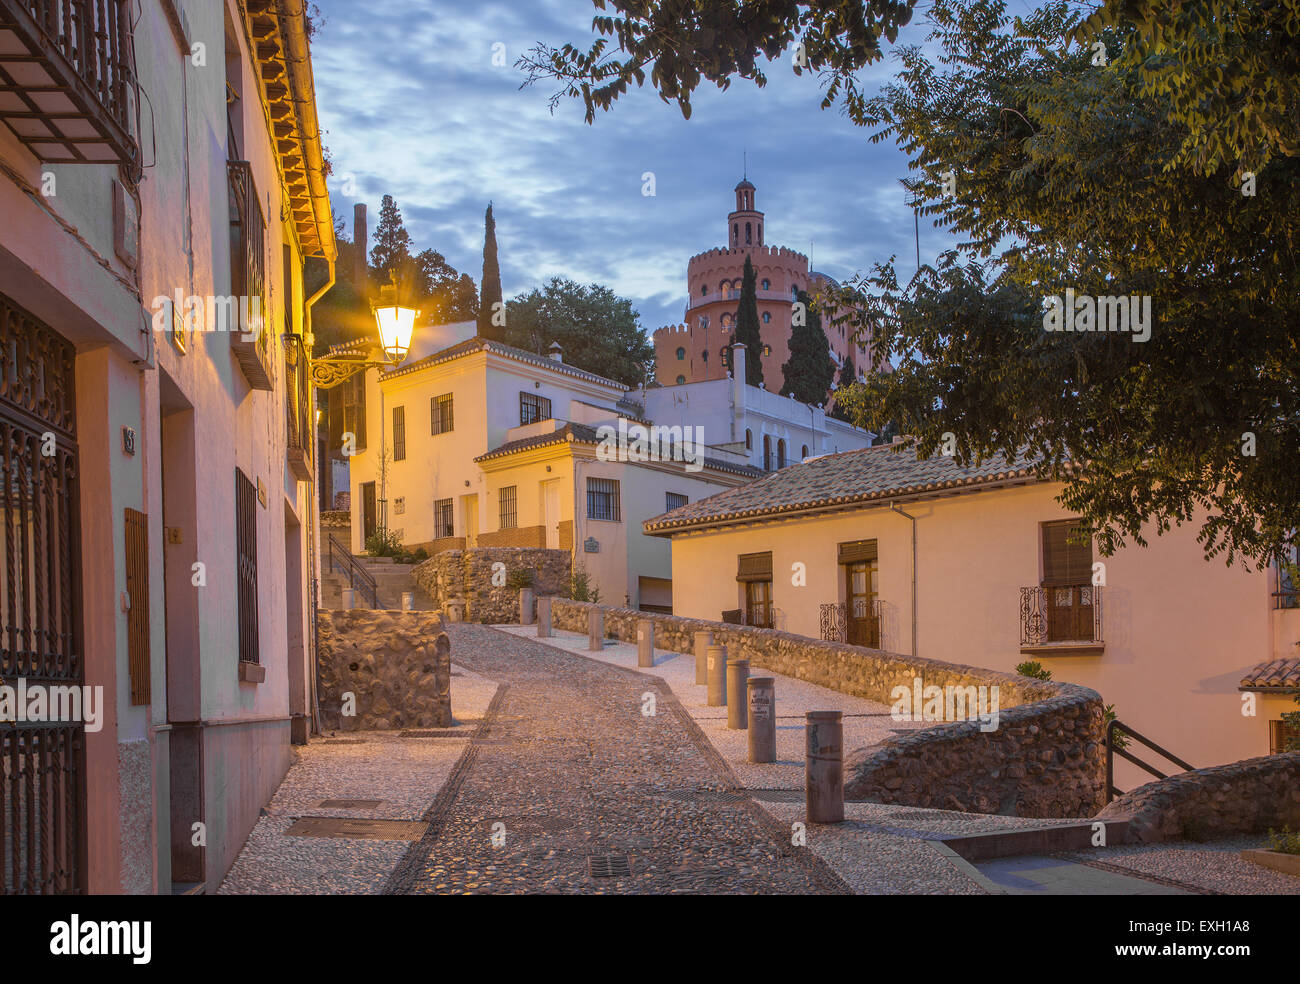 Granada - The ascent to Alhambra palace across the old street in morning dusk. Stock Photo